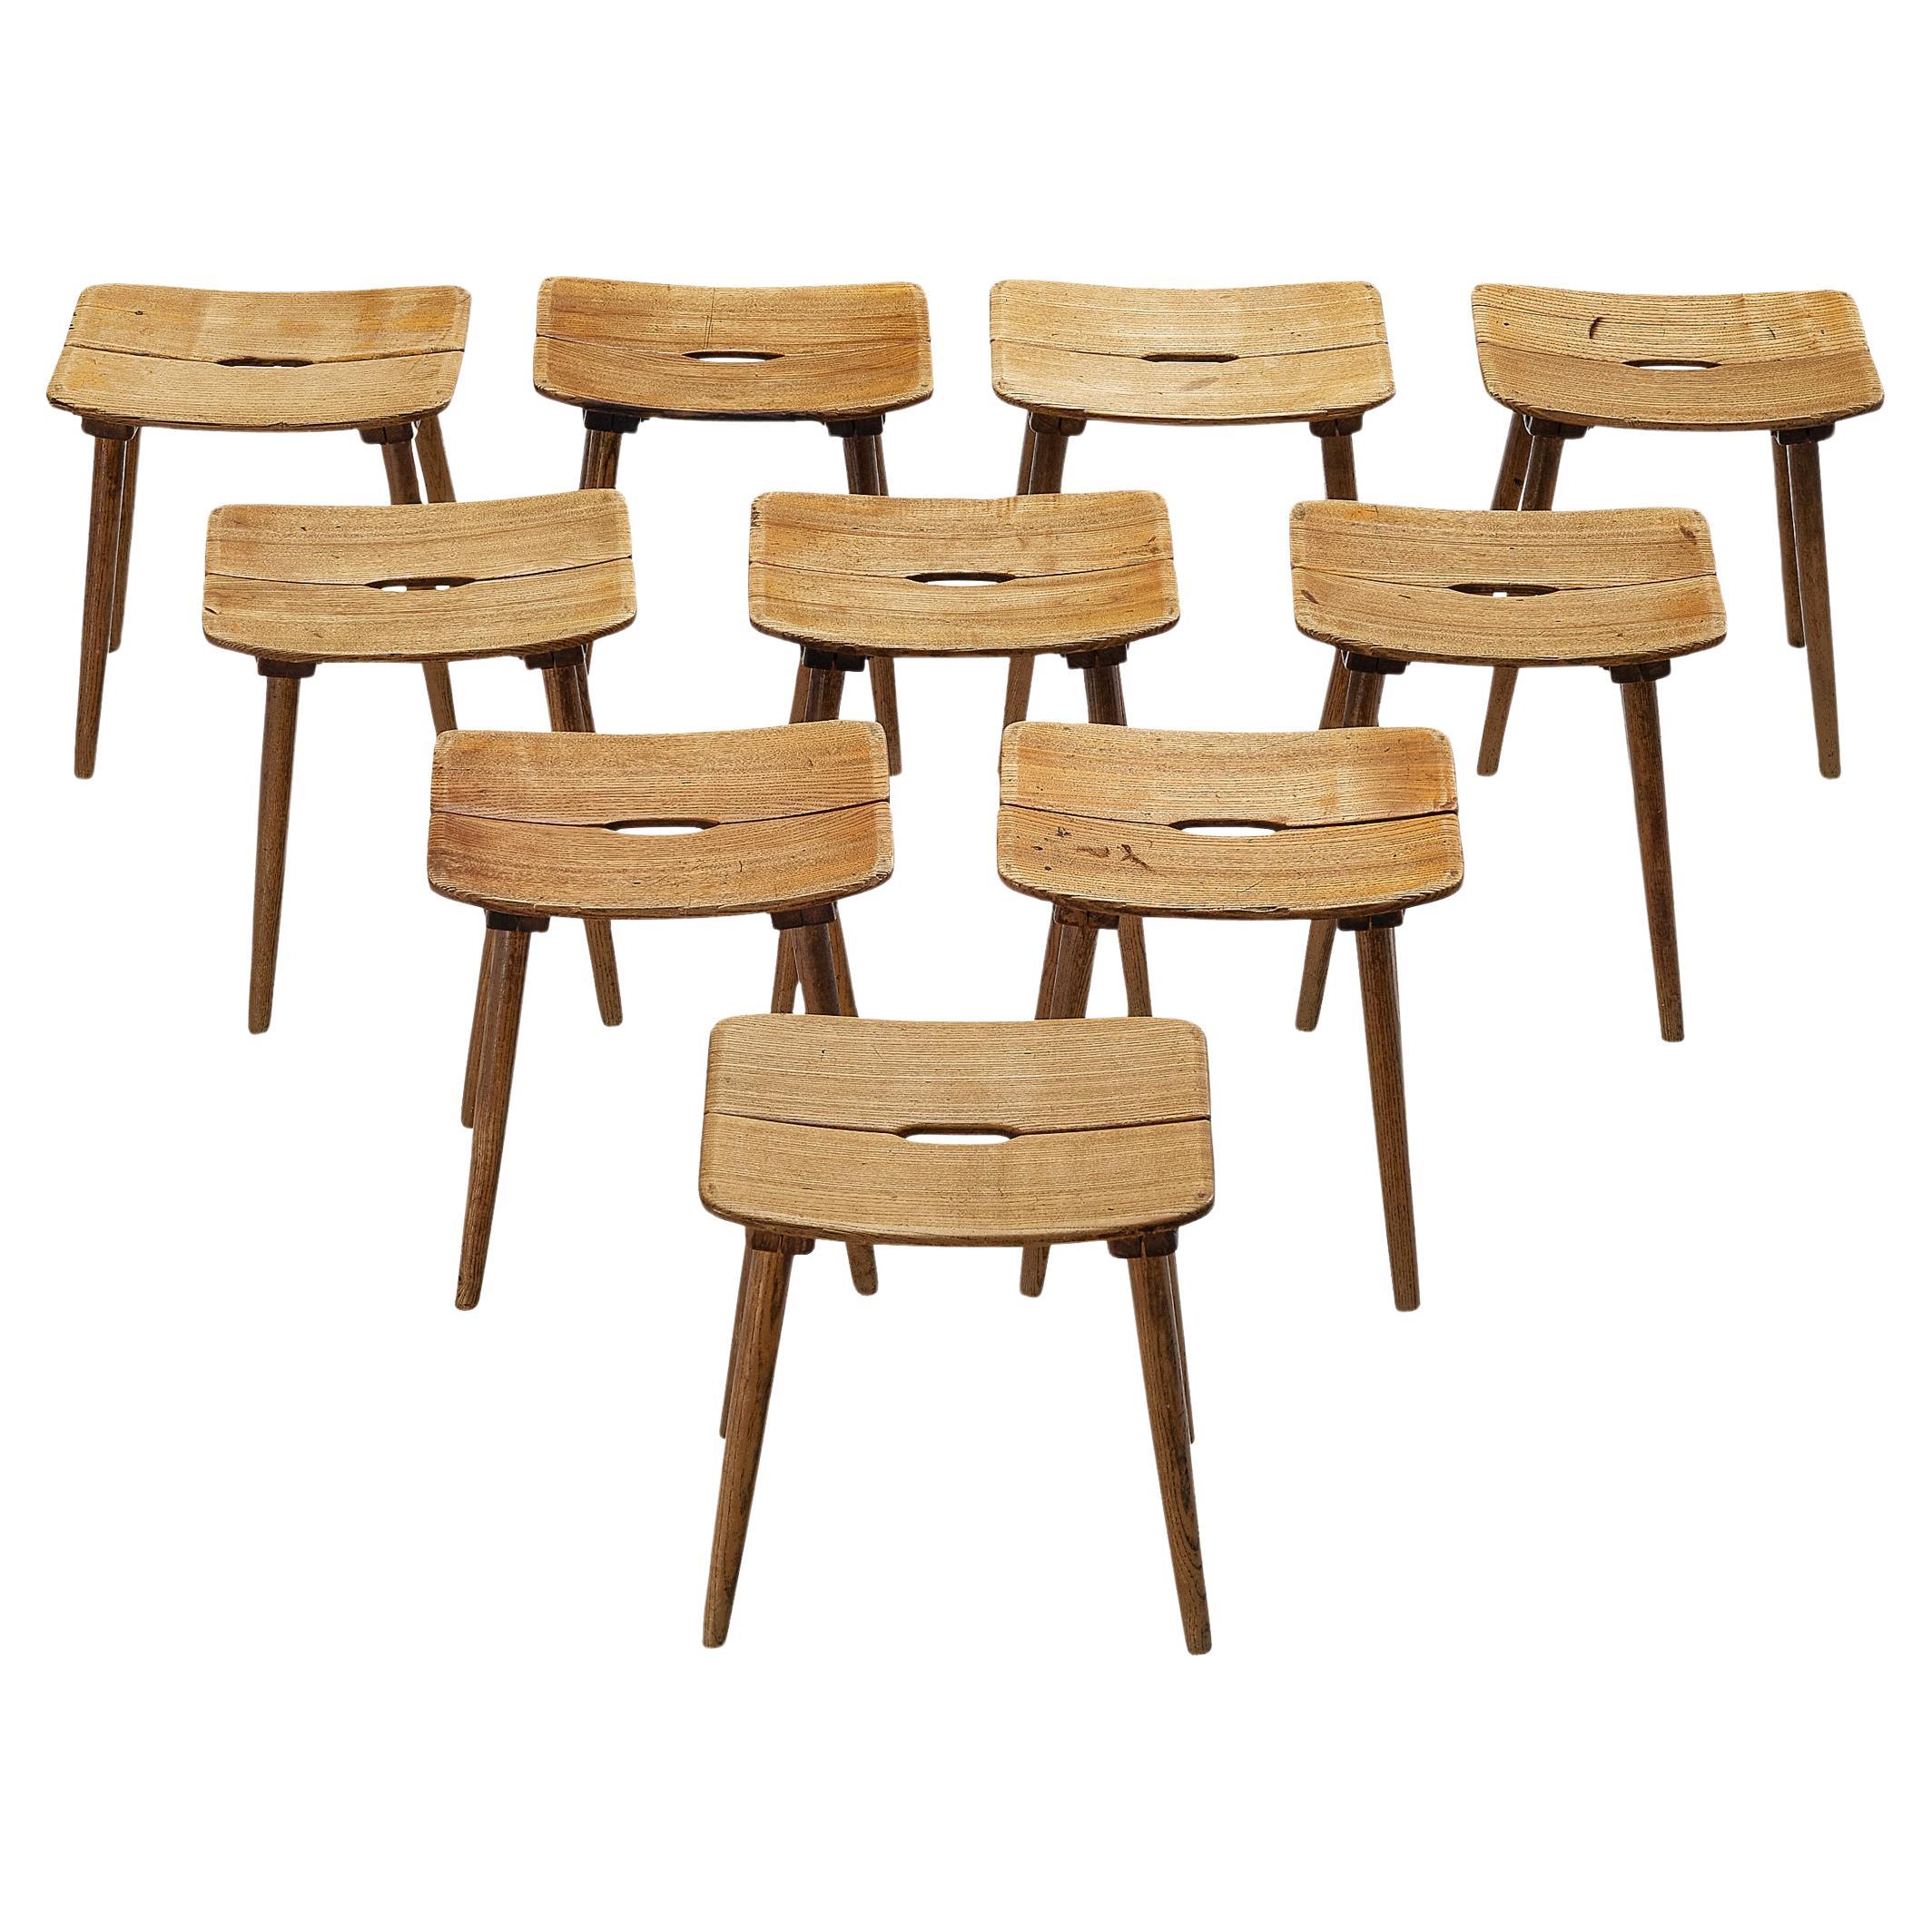  Jacob Müller for Wohnhilfe Stools in Ash  For Sale